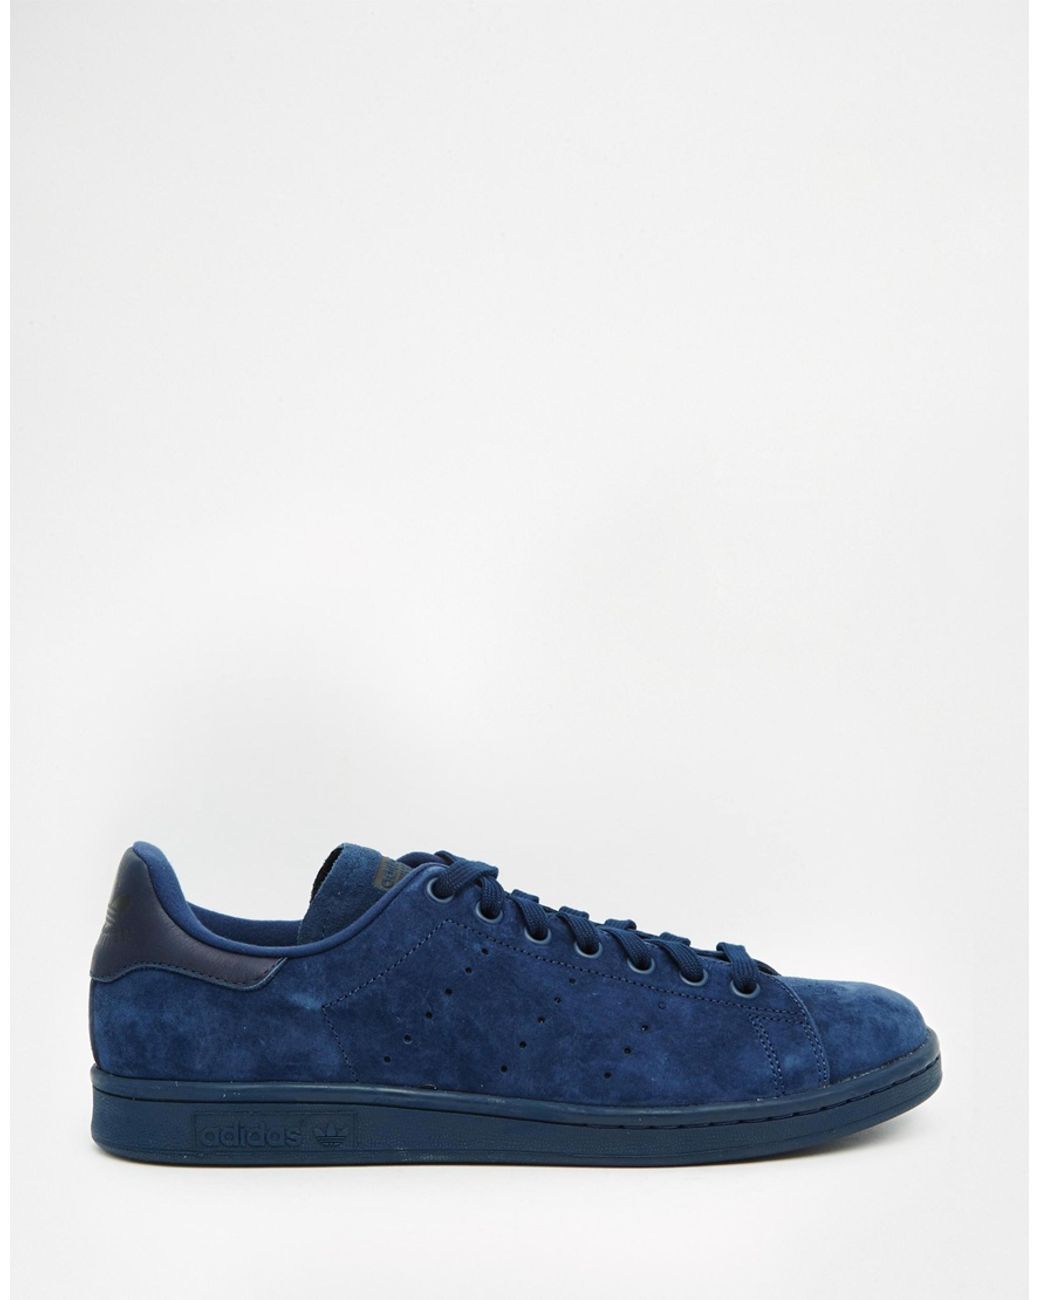 adidas Originals Smith Suede Trainers in Blue for Men Lyst